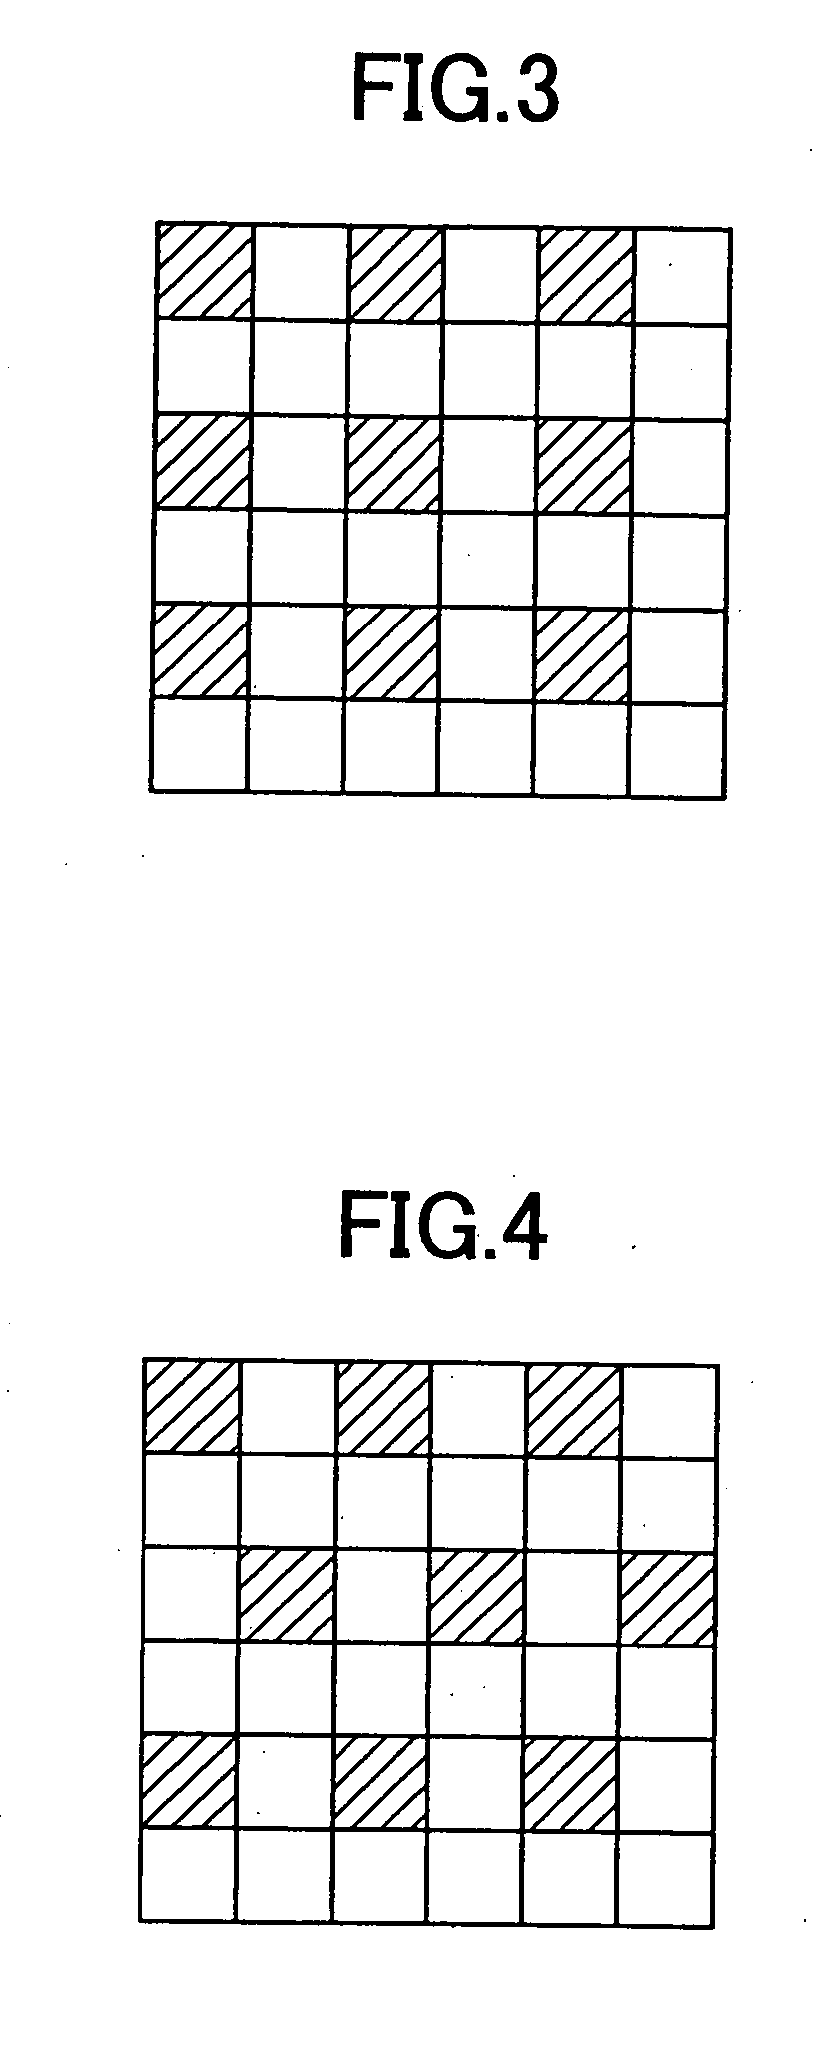 Image compression/decompression system employing pixel thinning-out and interpolation scheme